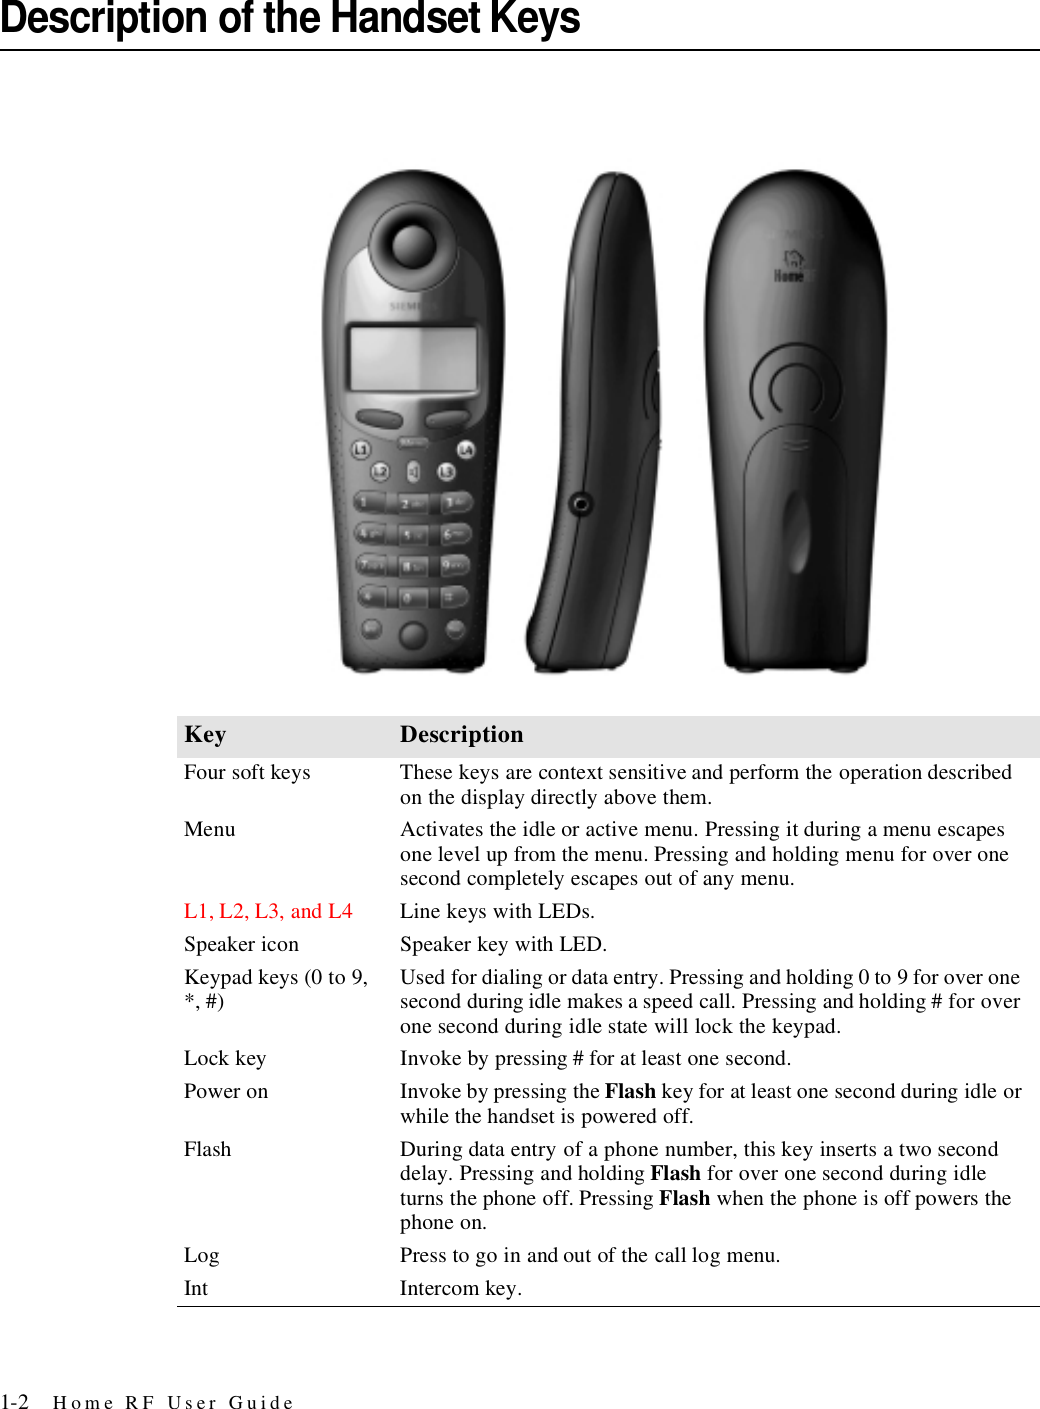 1-2 Home RF User GuideDescription of the Handset KeysKey DescriptionFour soft keys These keys are context sensitive and perform the operation described on the display directly above them.Menu Activates the idle or active menu. Pressing it during a menu escapes one level up from the menu. Pressing and holding menu for over one second completely escapes out of any menu.L1, L2, L3, and L4 Line keys with LEDs.Speaker icon Speaker key with LED.Keypad keys (0 to 9, *, #) Used for dialing or data entry. Pressing and holding 0 to 9 for over one second during idle makes a speed call. Pressing and holding # for over one second during idle state will lock the keypad.Lock key Invoke by pressing # for at least one second.Power on Invoke by pressing the Flash key for at least one second during idle or while the handset is powered off.Flash During data entry of a phone number, this key inserts a two second delay. Pressing and holding Flash for over one second during idle turns the phone off. Pressing Flash when the phone is off powers the phone on.Log Press to go in and out of the call log menu.Int Intercom key.